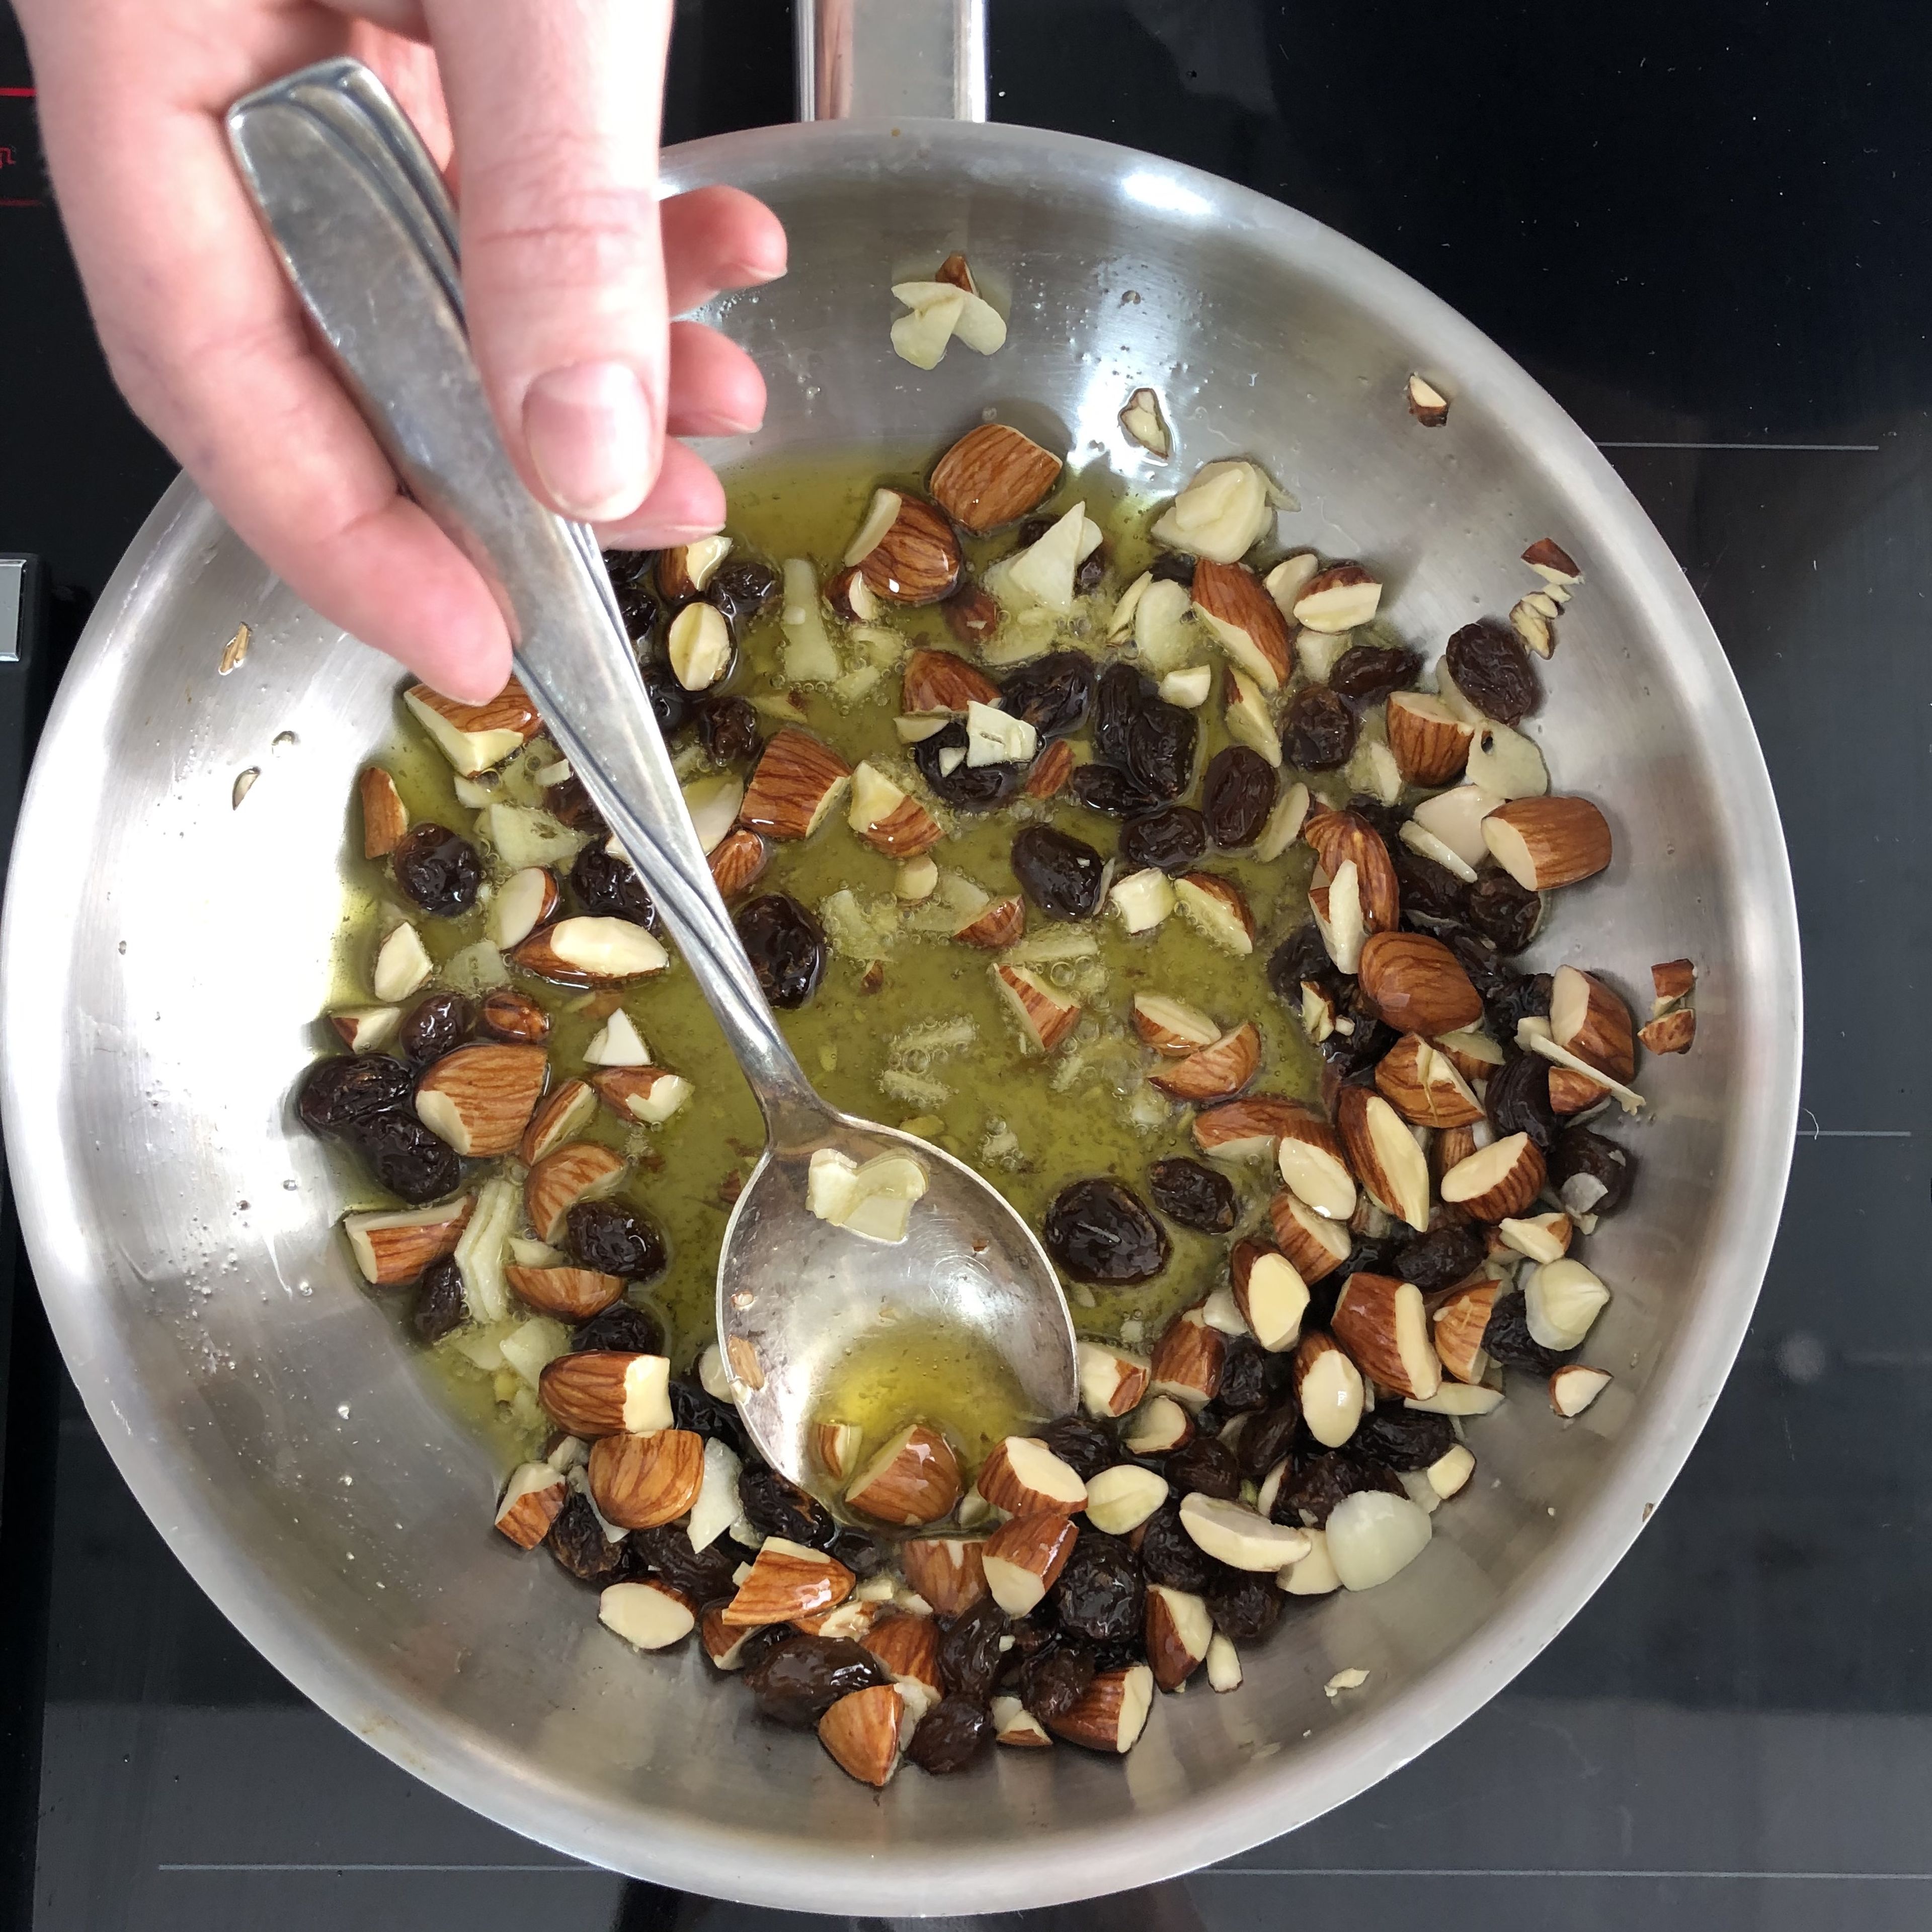 For the crunchy topping, heat olive oil in a pan, add almonds and fry briefly. Then add garlic and raisins and fry until everything is crispy and brown. Transfer to a bowl and set aside.